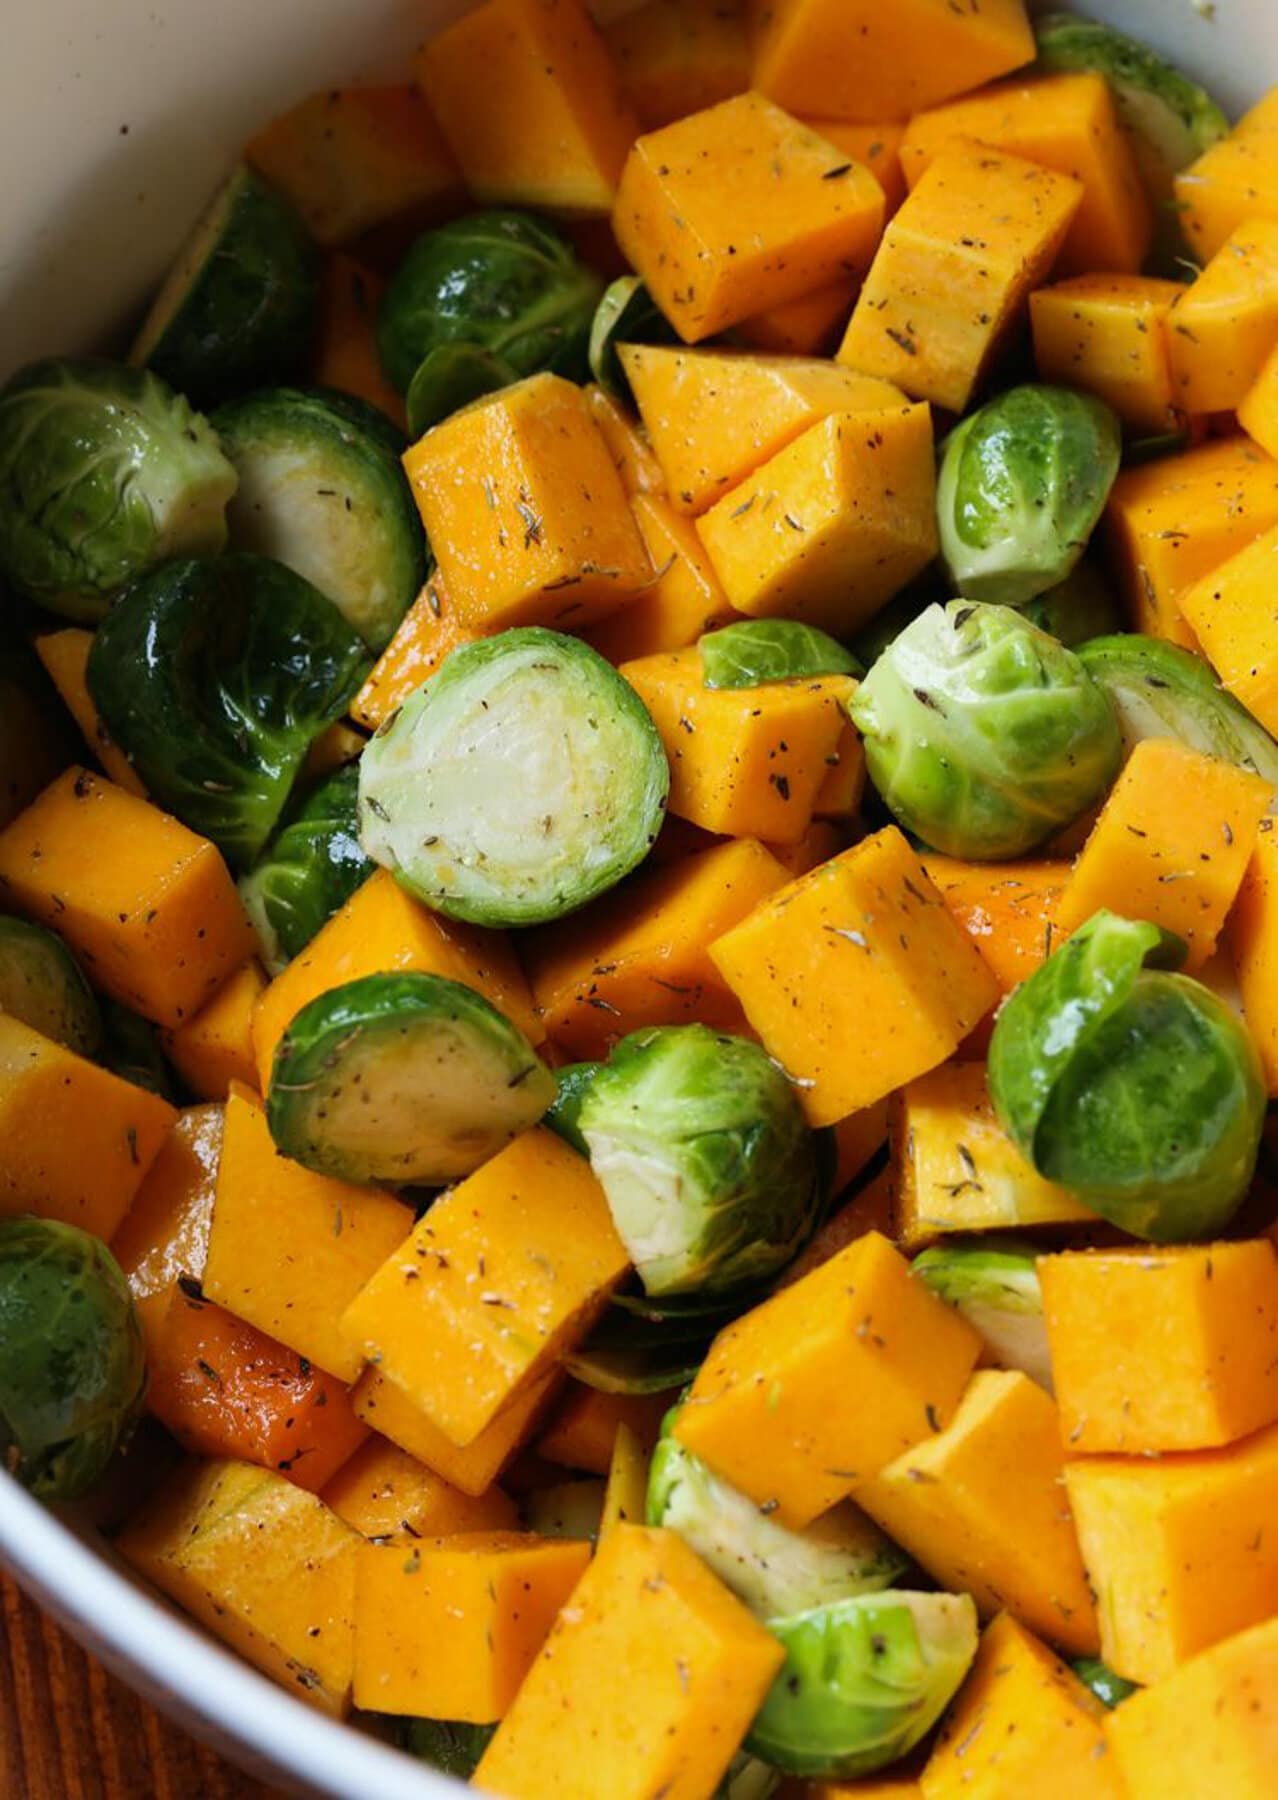 Sweet potatoes and brussel sprouts